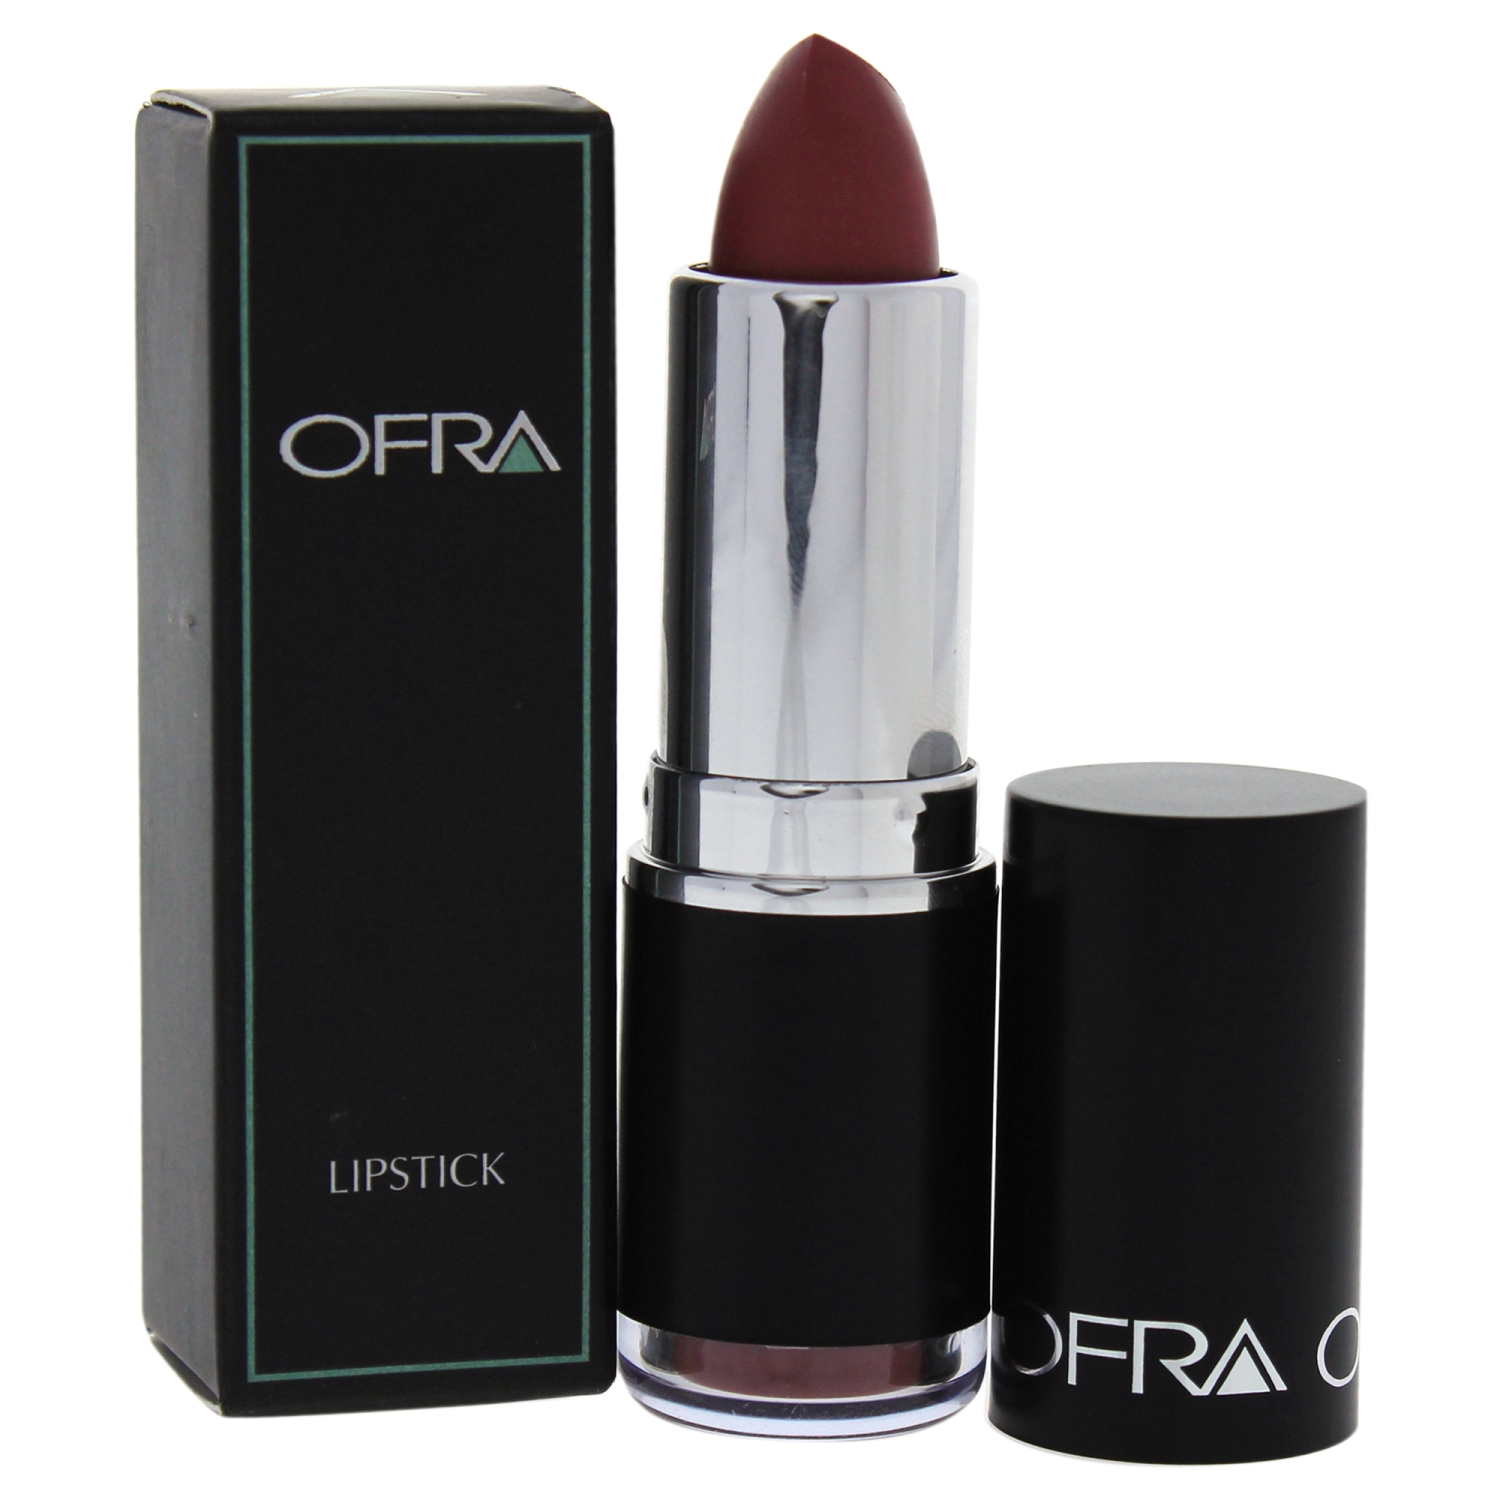 Lipstick - Spicy by Ofra for Women - 0.1 oz Lipstick